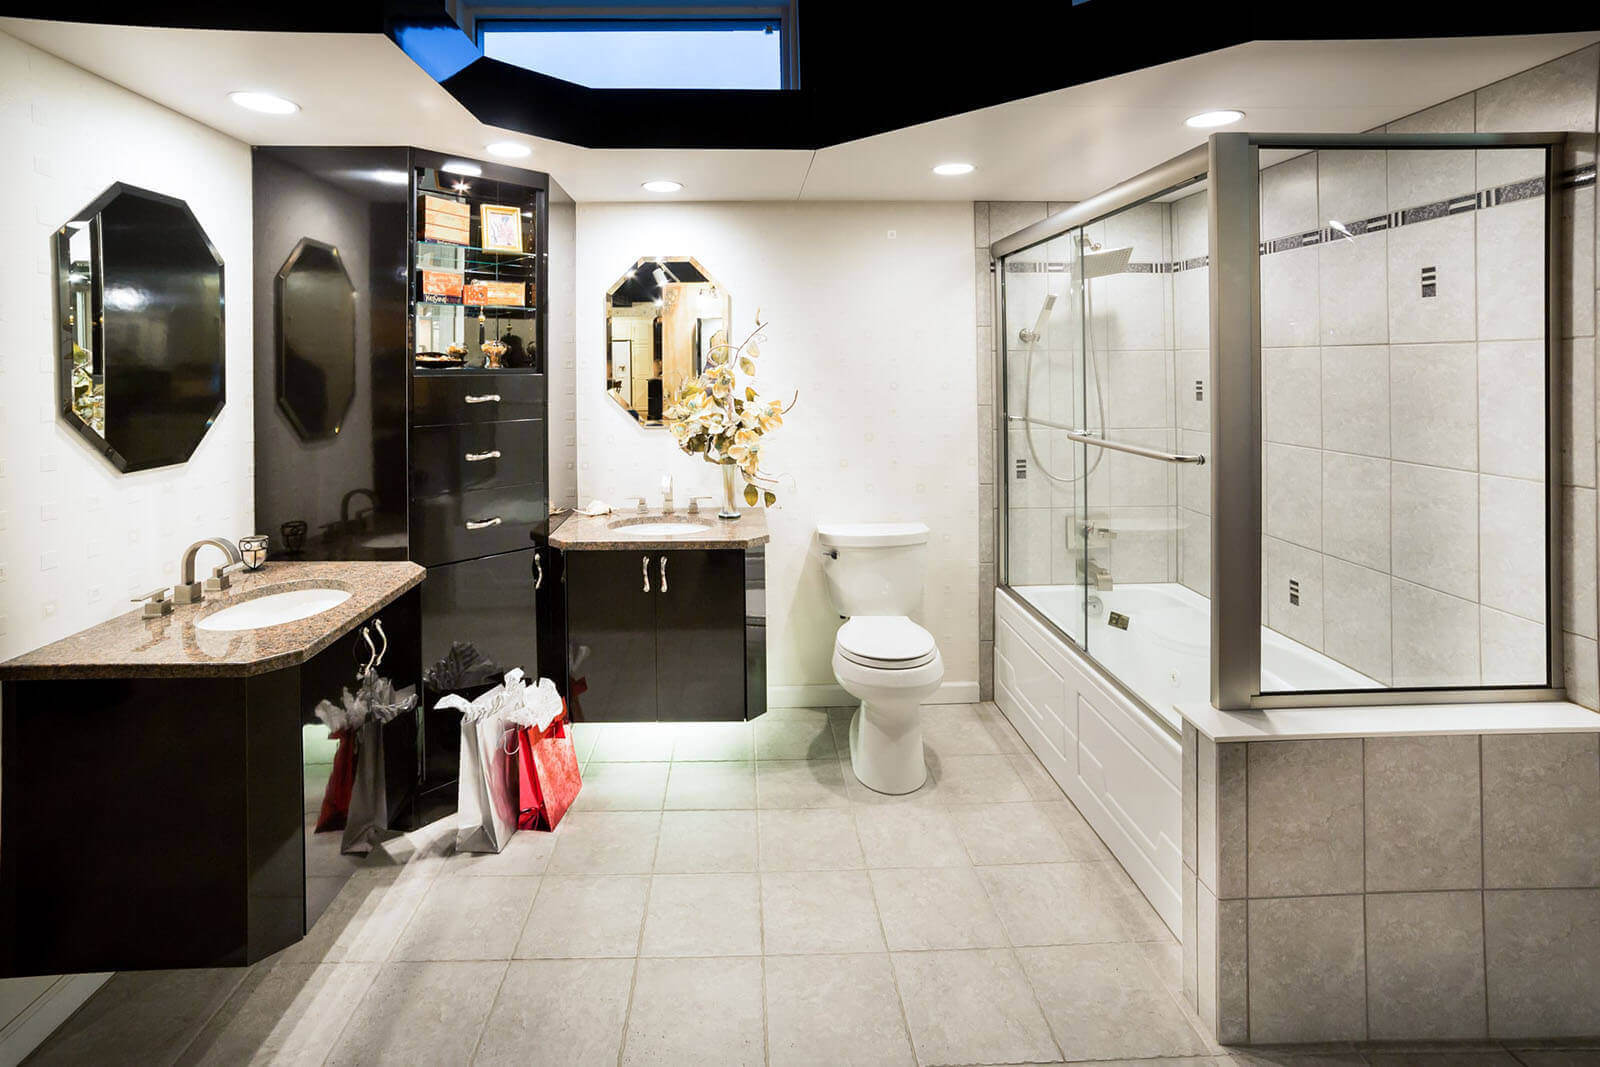 Bathroom Remodeling |  Top Trends for Bathroom Remodels: Out with the old and in with the new